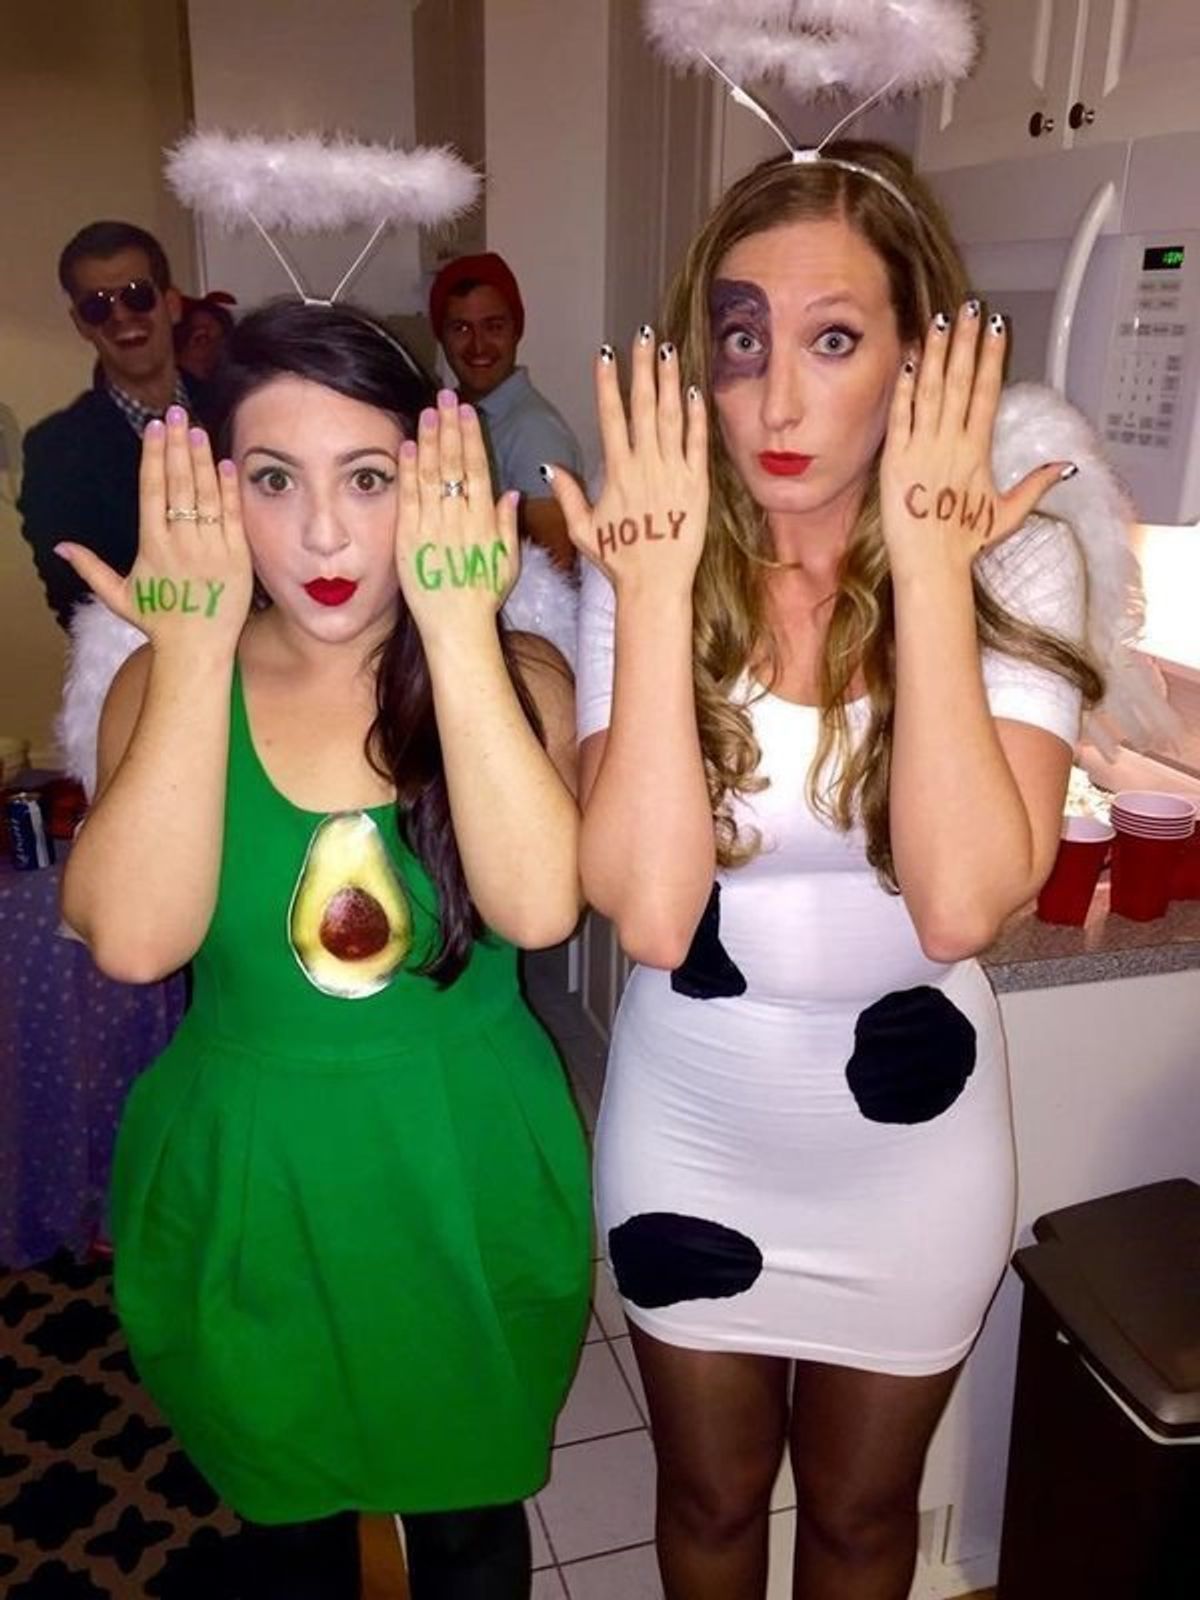 11 Halloween Costumes That Will Make You LOL